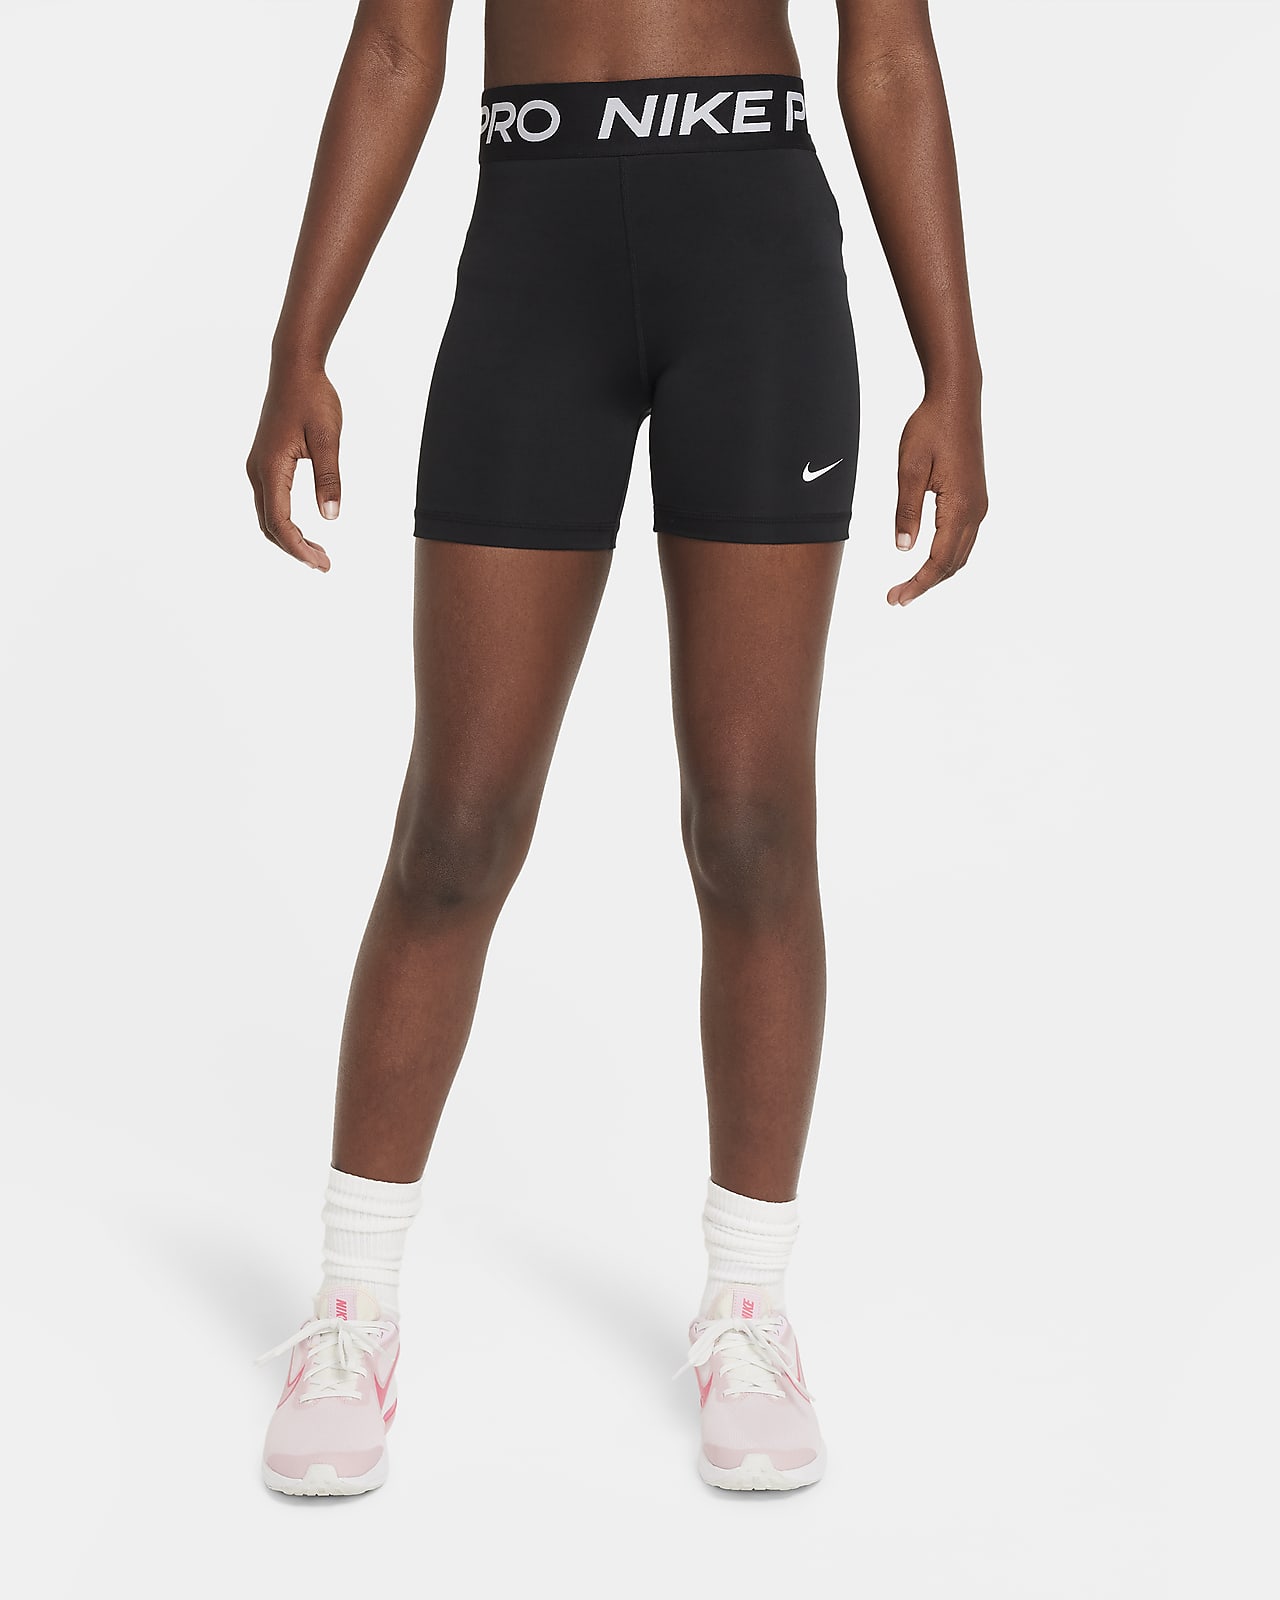 Mike Pro Girls Compression Shorts Polyester 